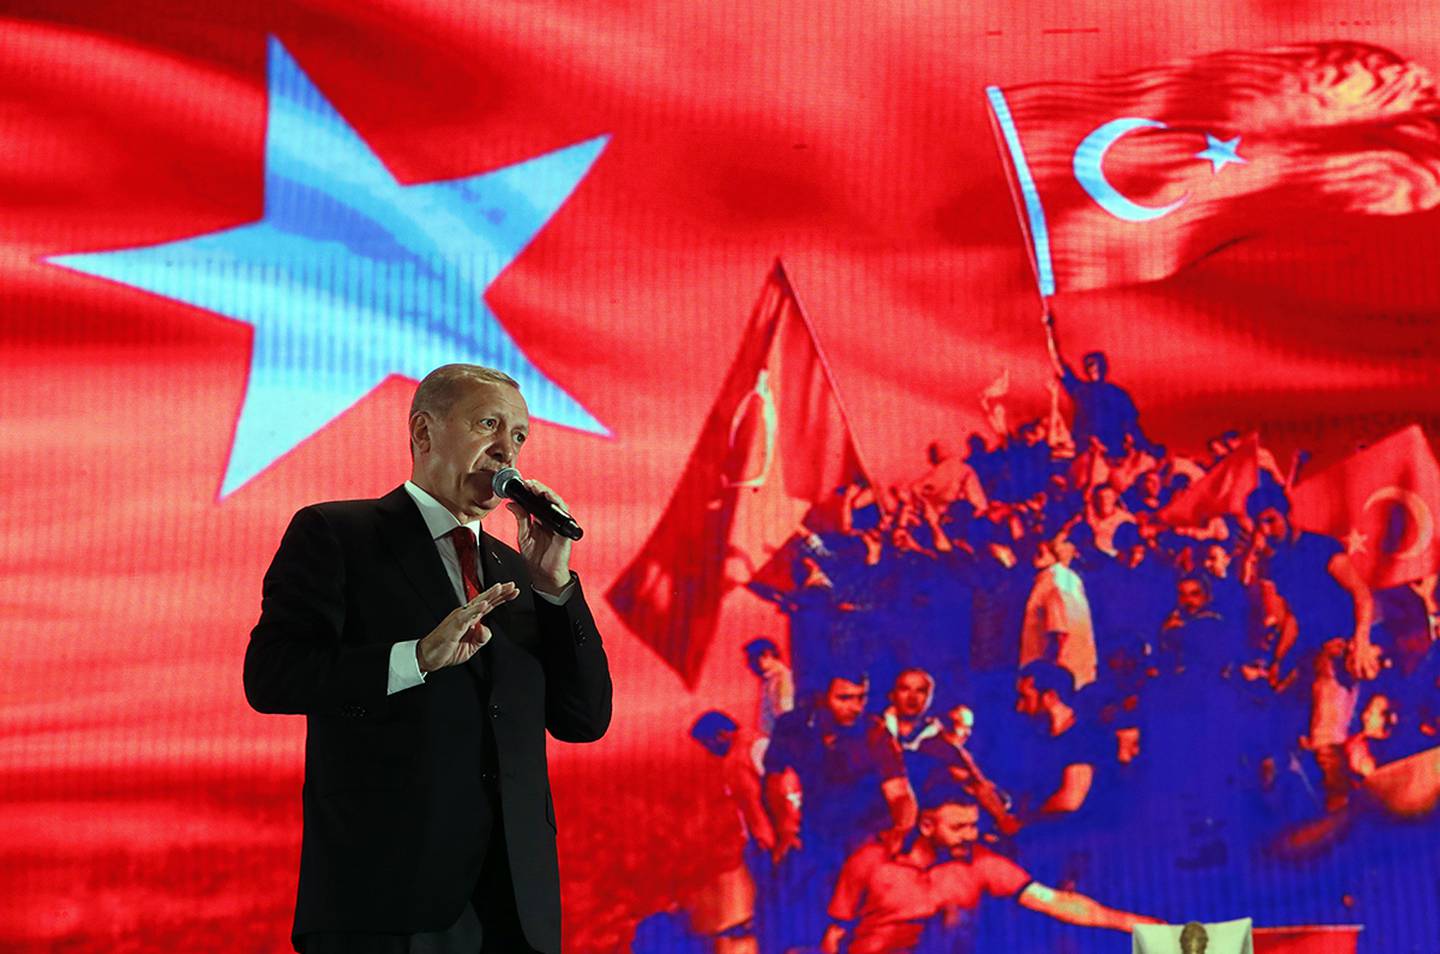 In this file photo dated July 15, 2019, Turkey's President Recep Tayyip Erdogan delivers a speech at a rally to honor the victims of the July 15, 2016, failed coup attempt, in Istanbul.